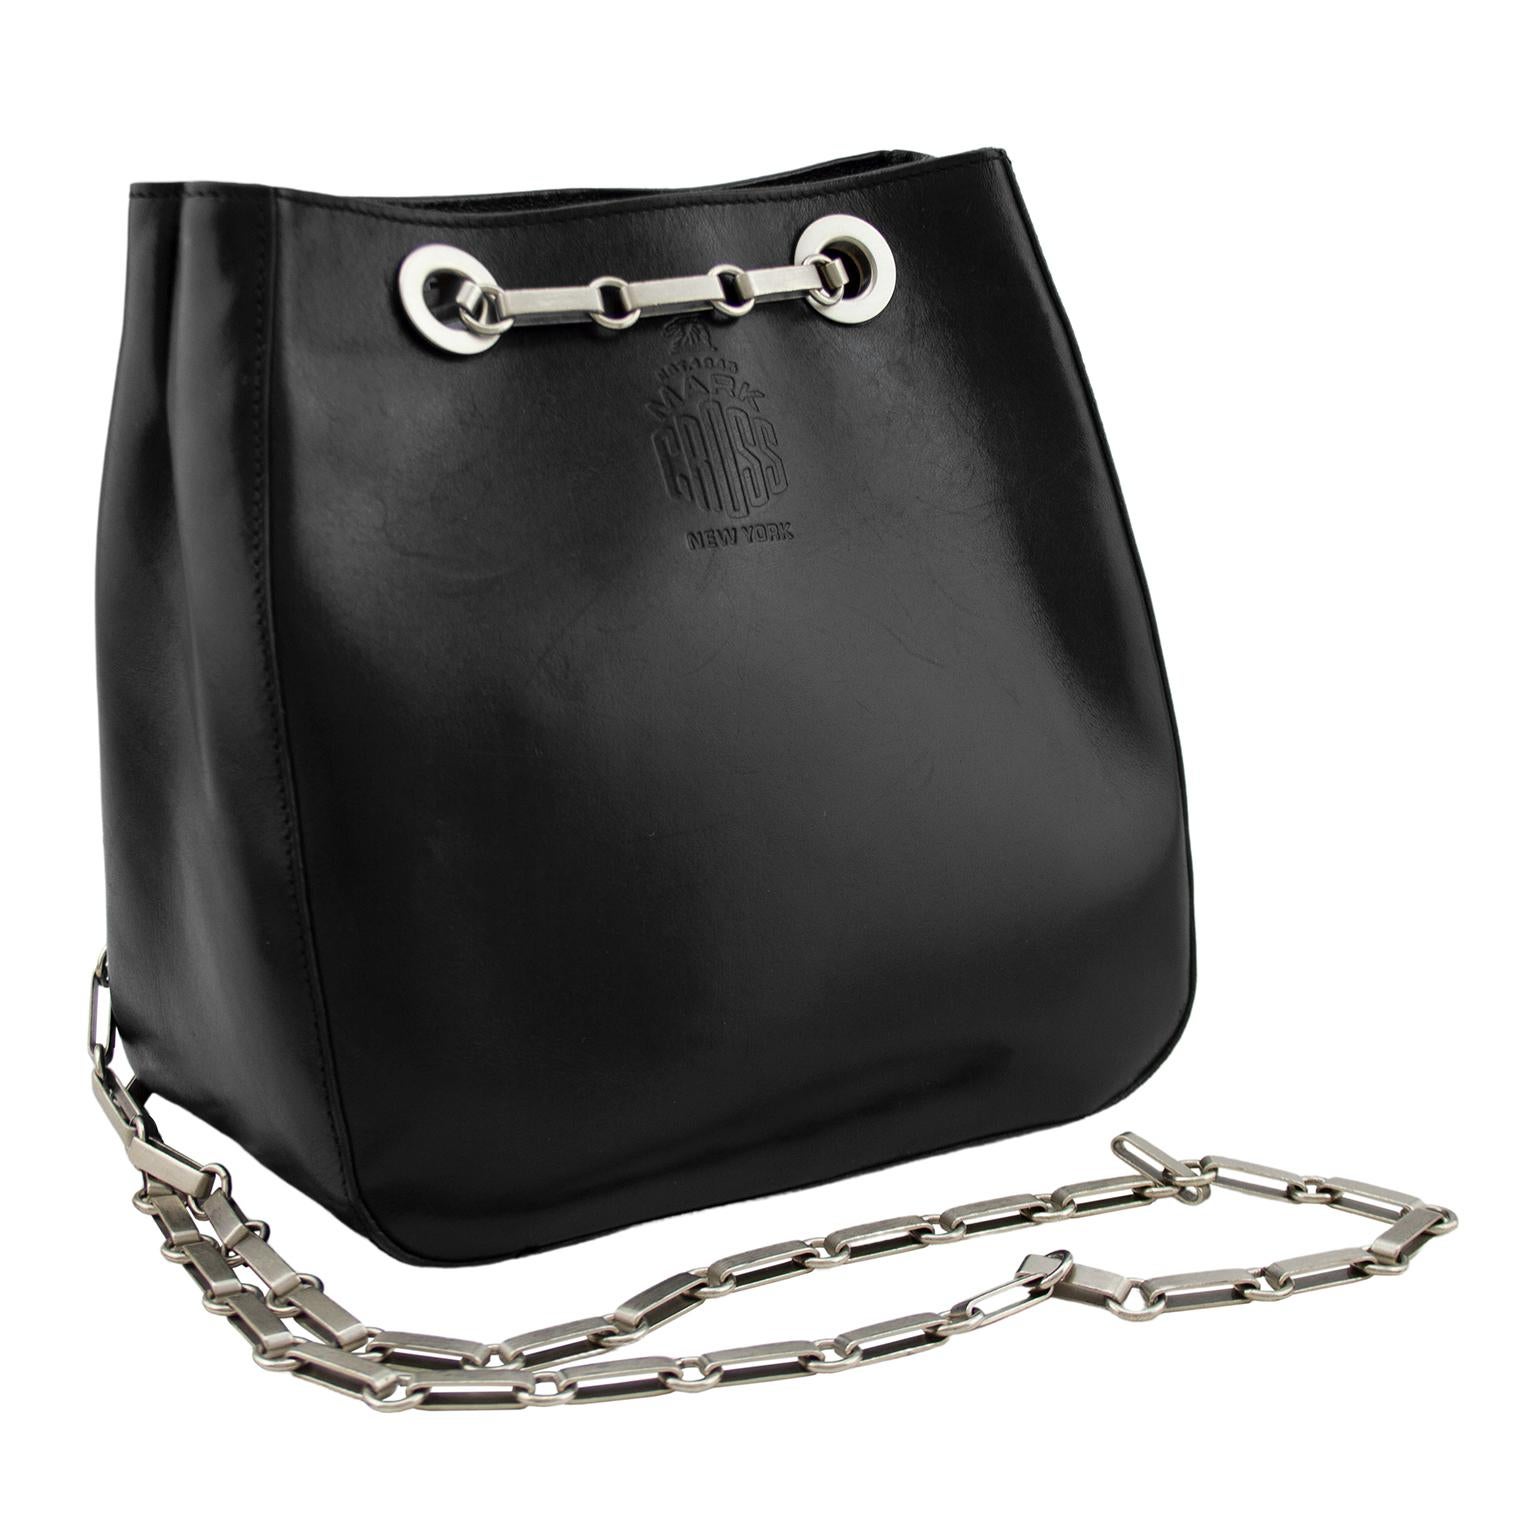 1980s Mark Cross Black Leather Small Bucket Bag In Good Condition For Sale In Toronto, Ontario